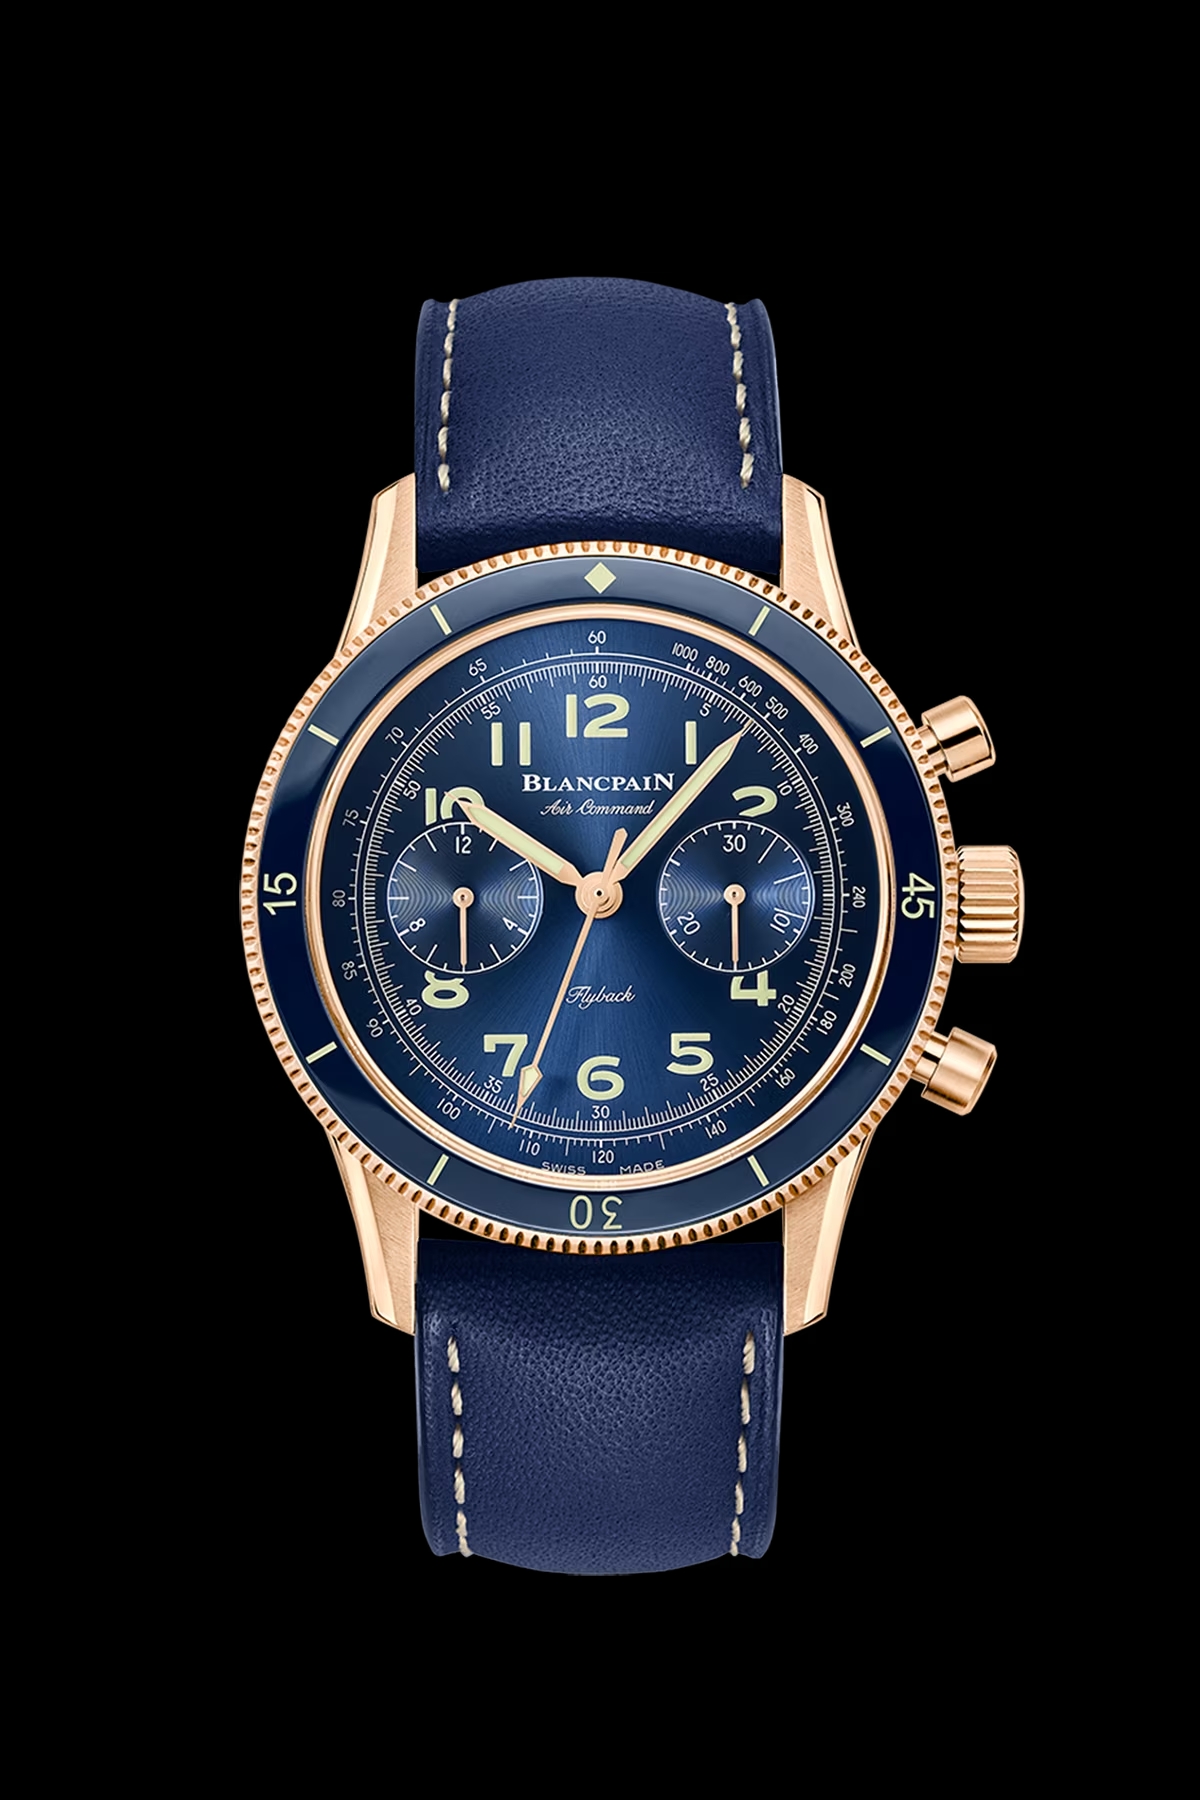 The new Blancpain Fifty Fathoms cements its place as the OG divers watch |  British GQ